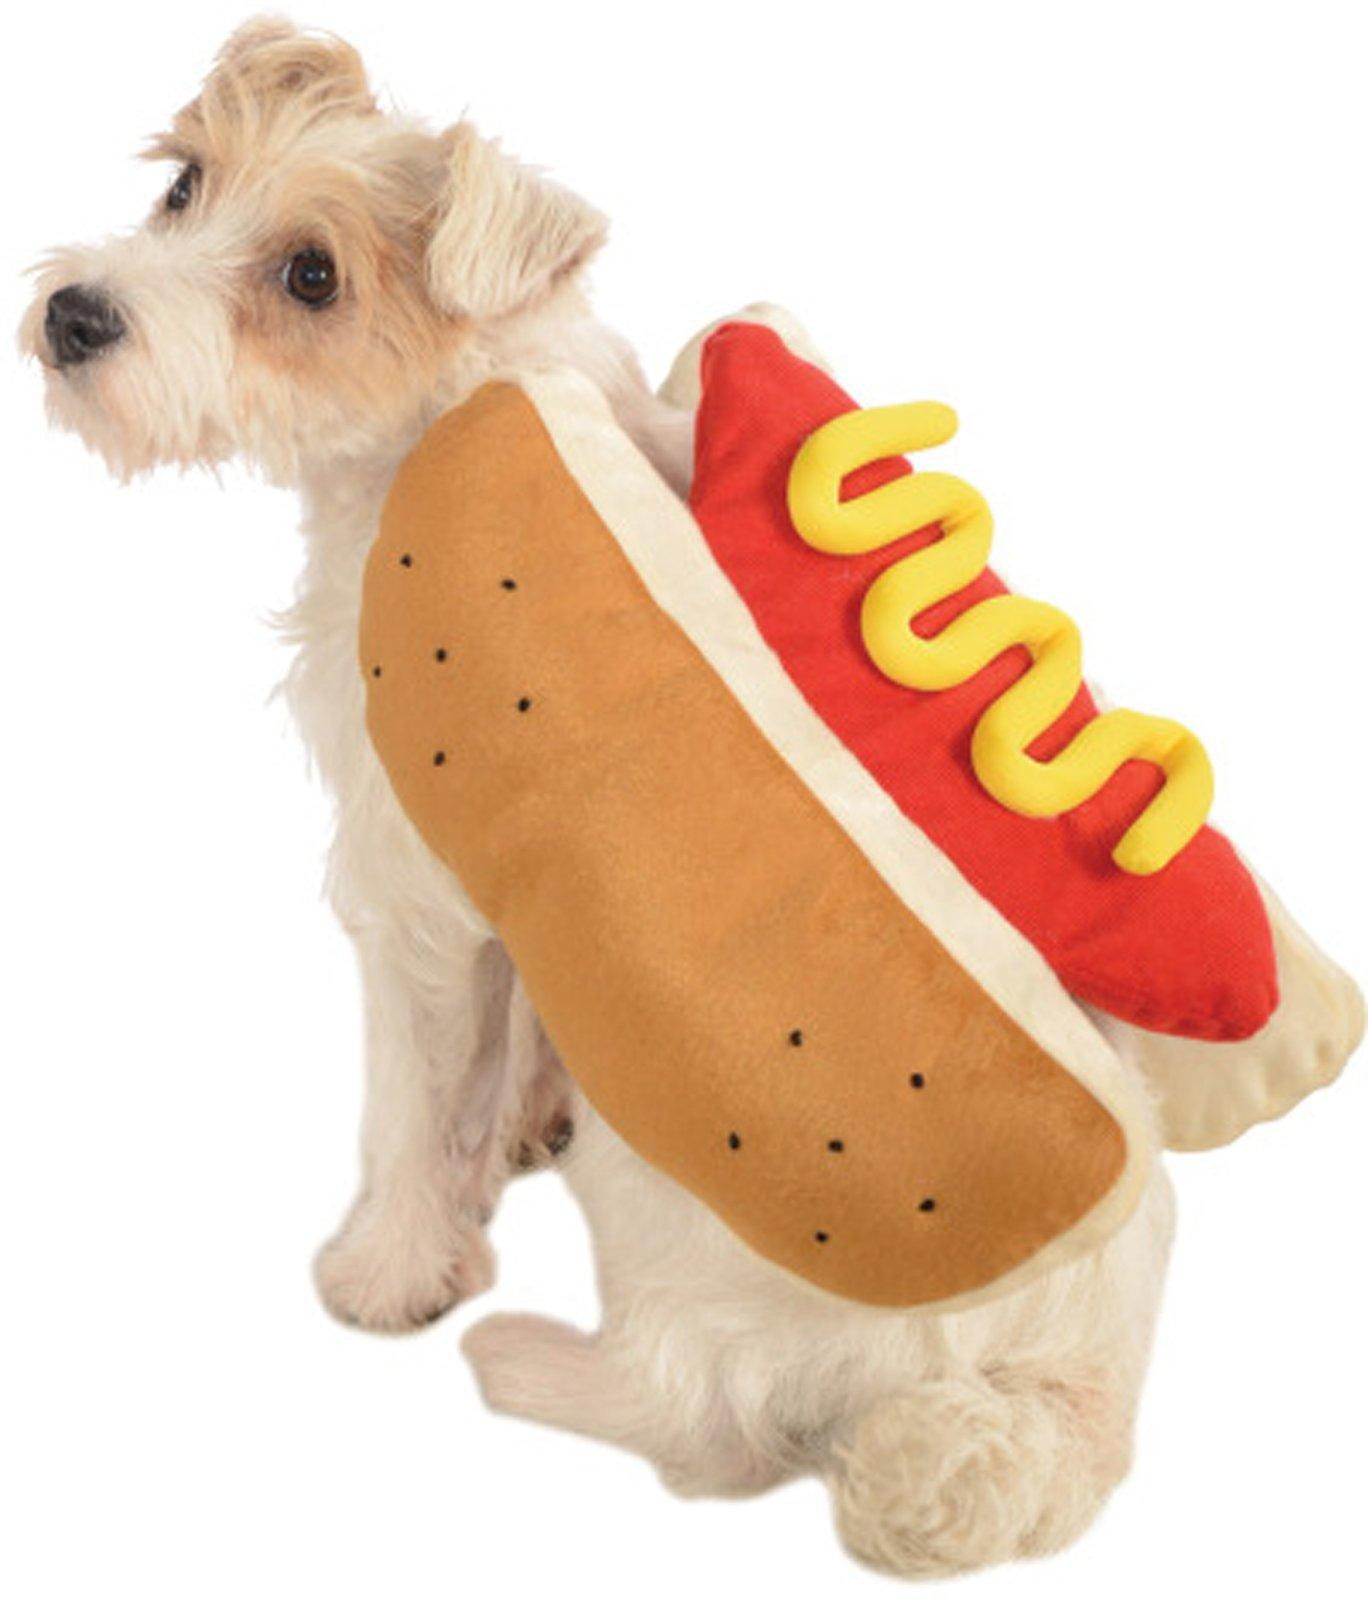 Hot Dog Halloween Costumes For Dogs
 Top 10 Tuesdays Dog Costumes Halloween Costume Ideas